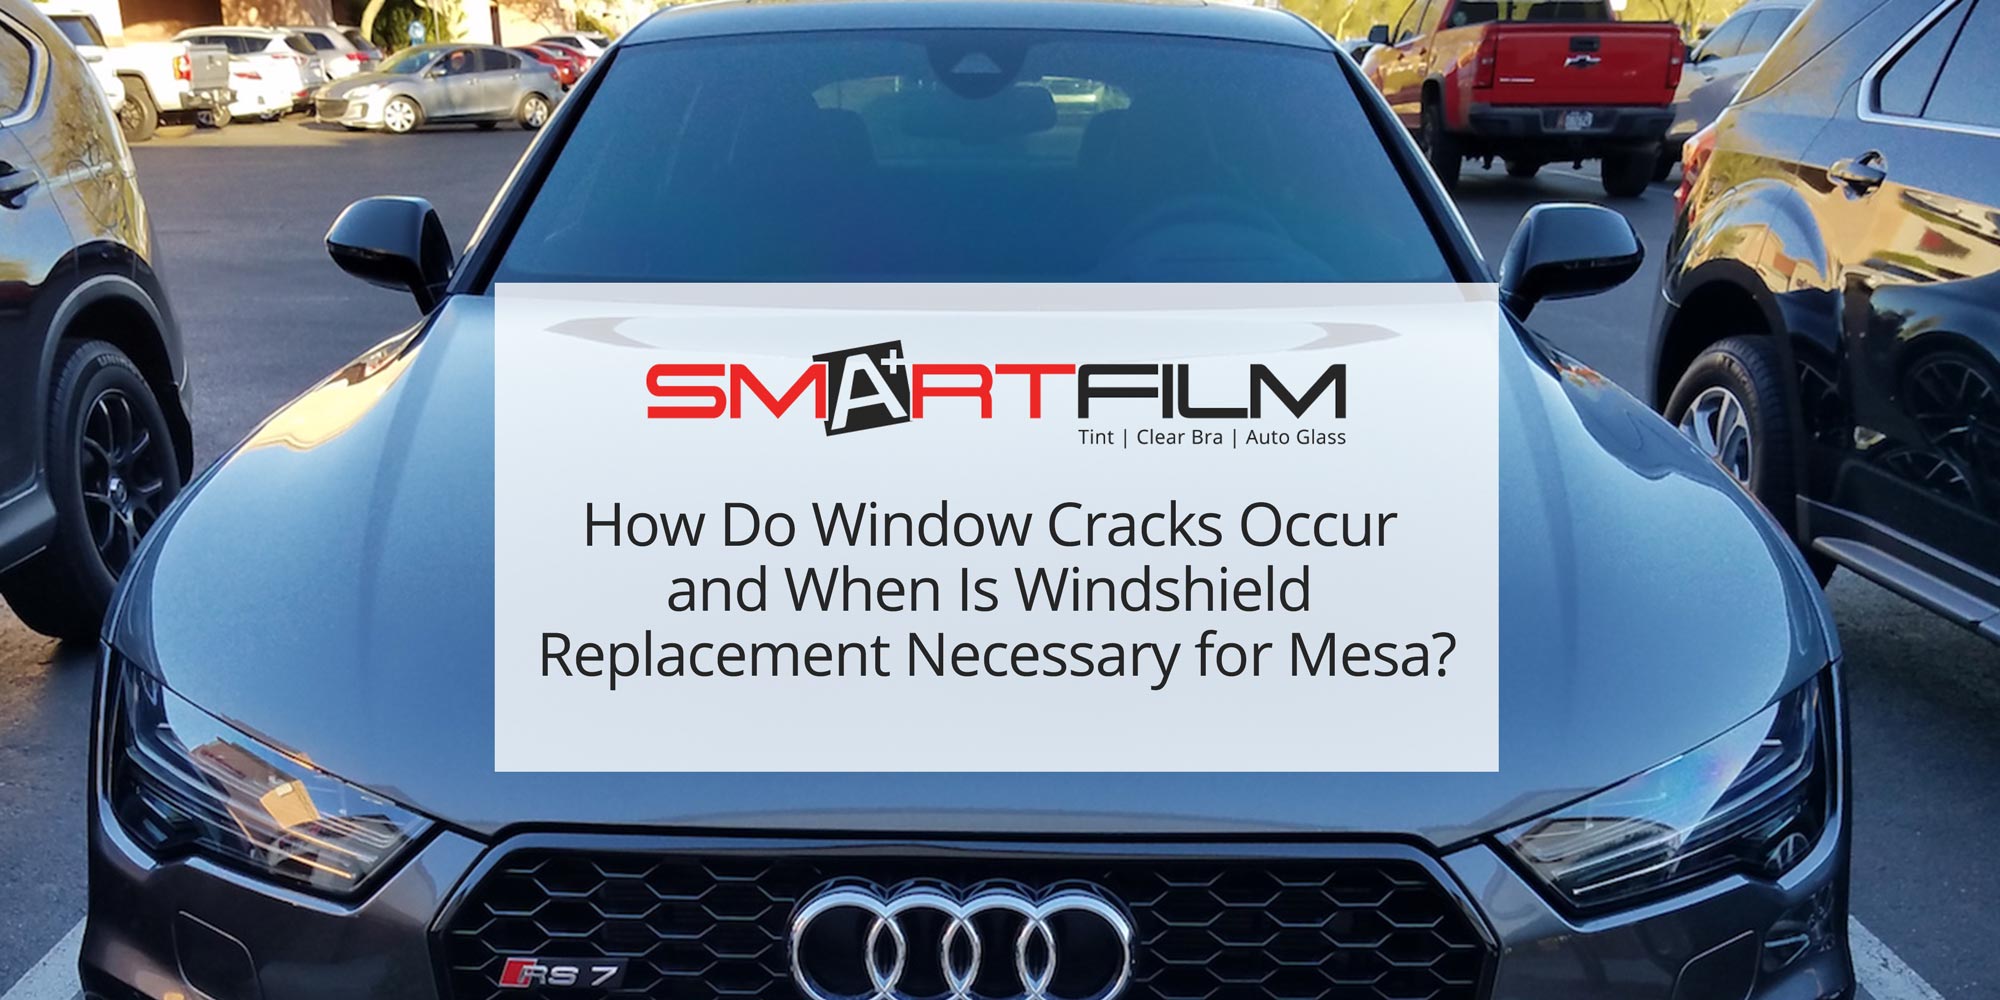 How-Do-Window-Cracks-Occur-and-When-Is-Windshield-Replacement-Necessary-for-Mesa